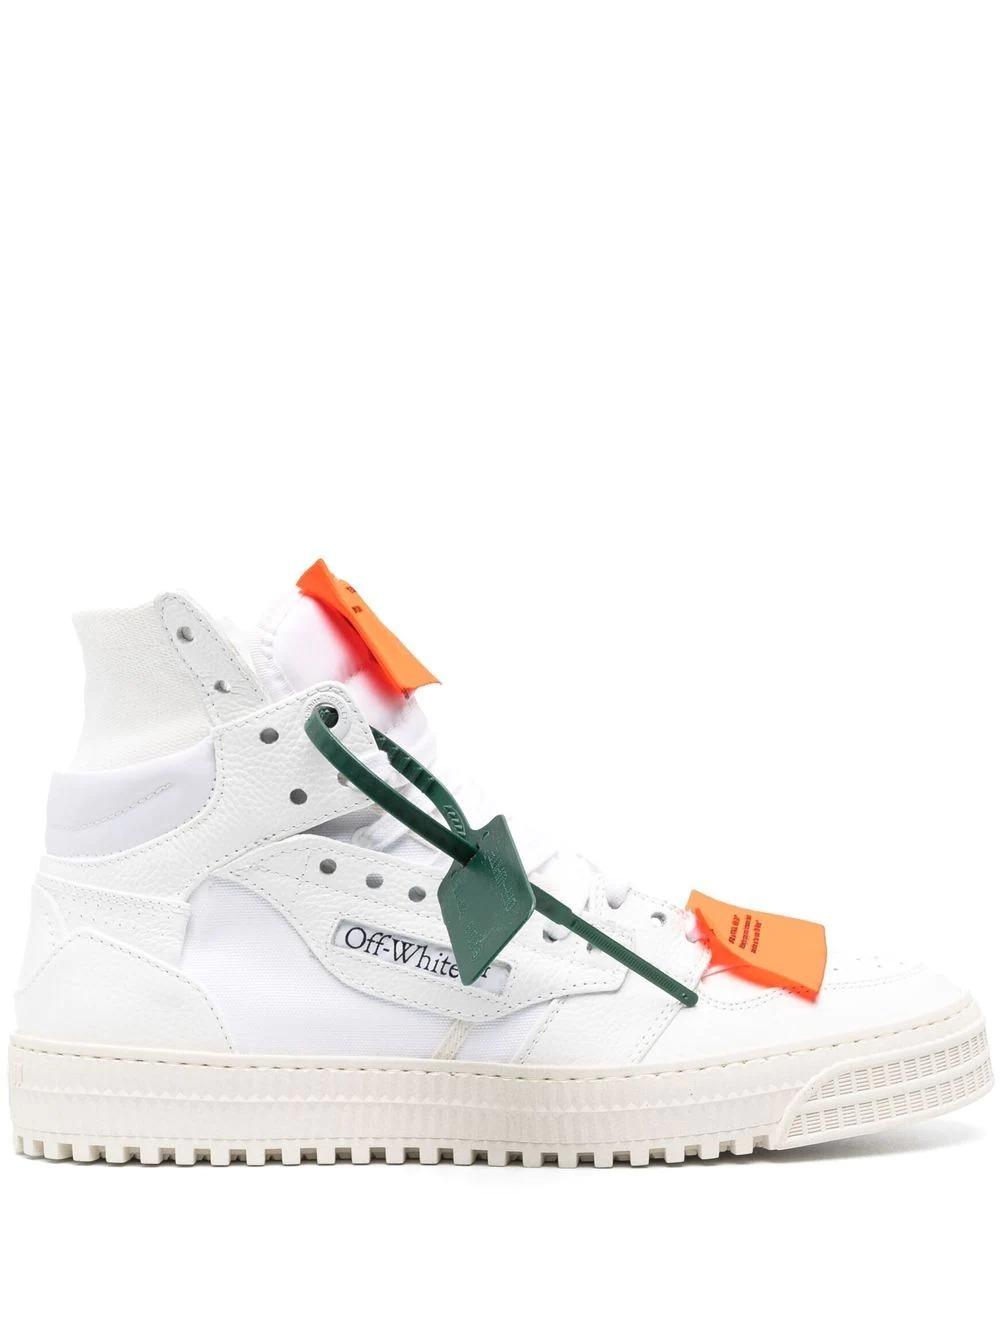 Virgil Abloh Teases OFF-WHITE Off Court Sneakers